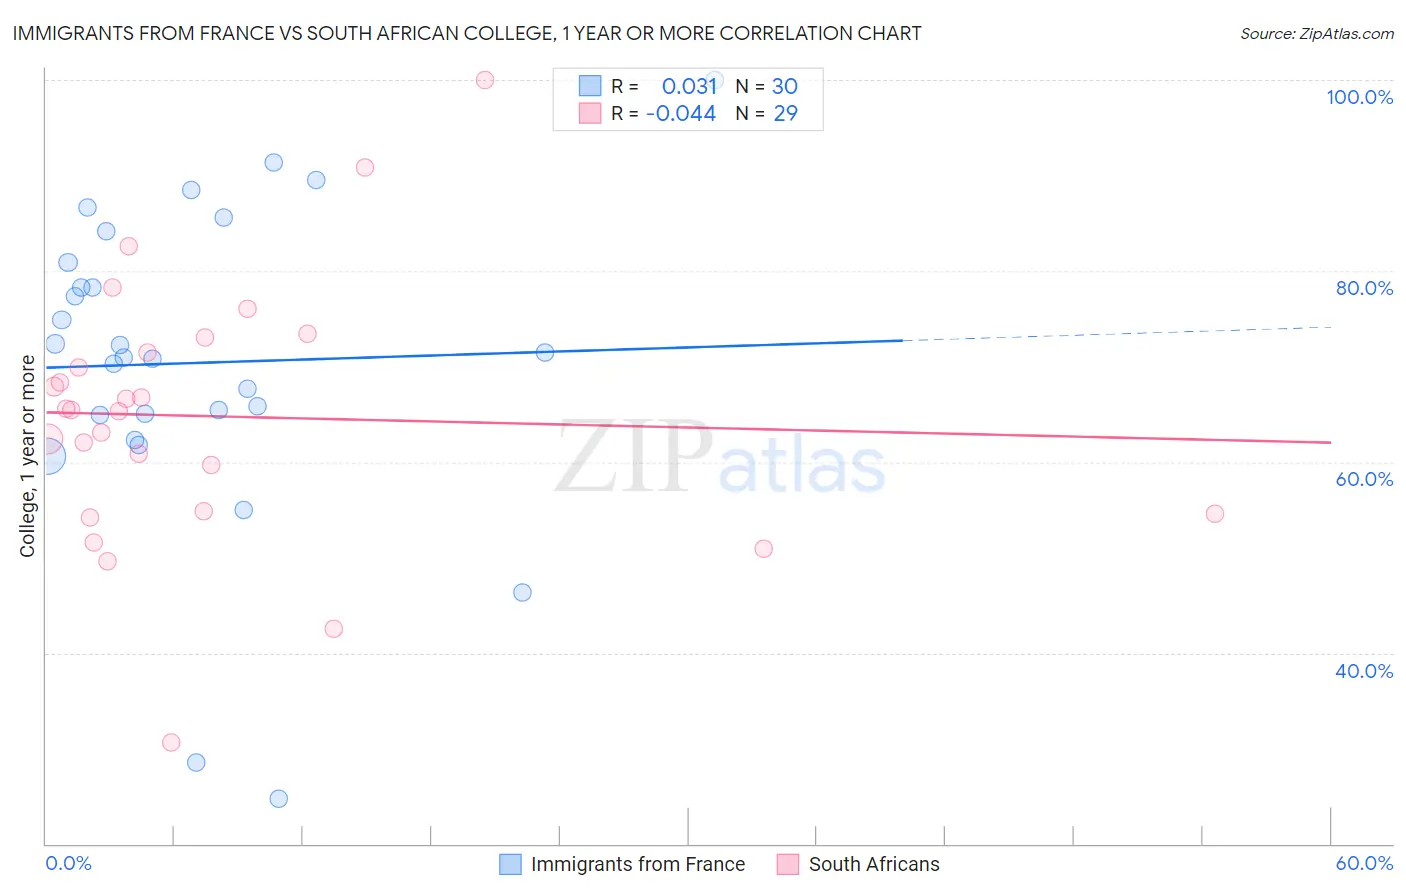 Immigrants from France vs South African College, 1 year or more